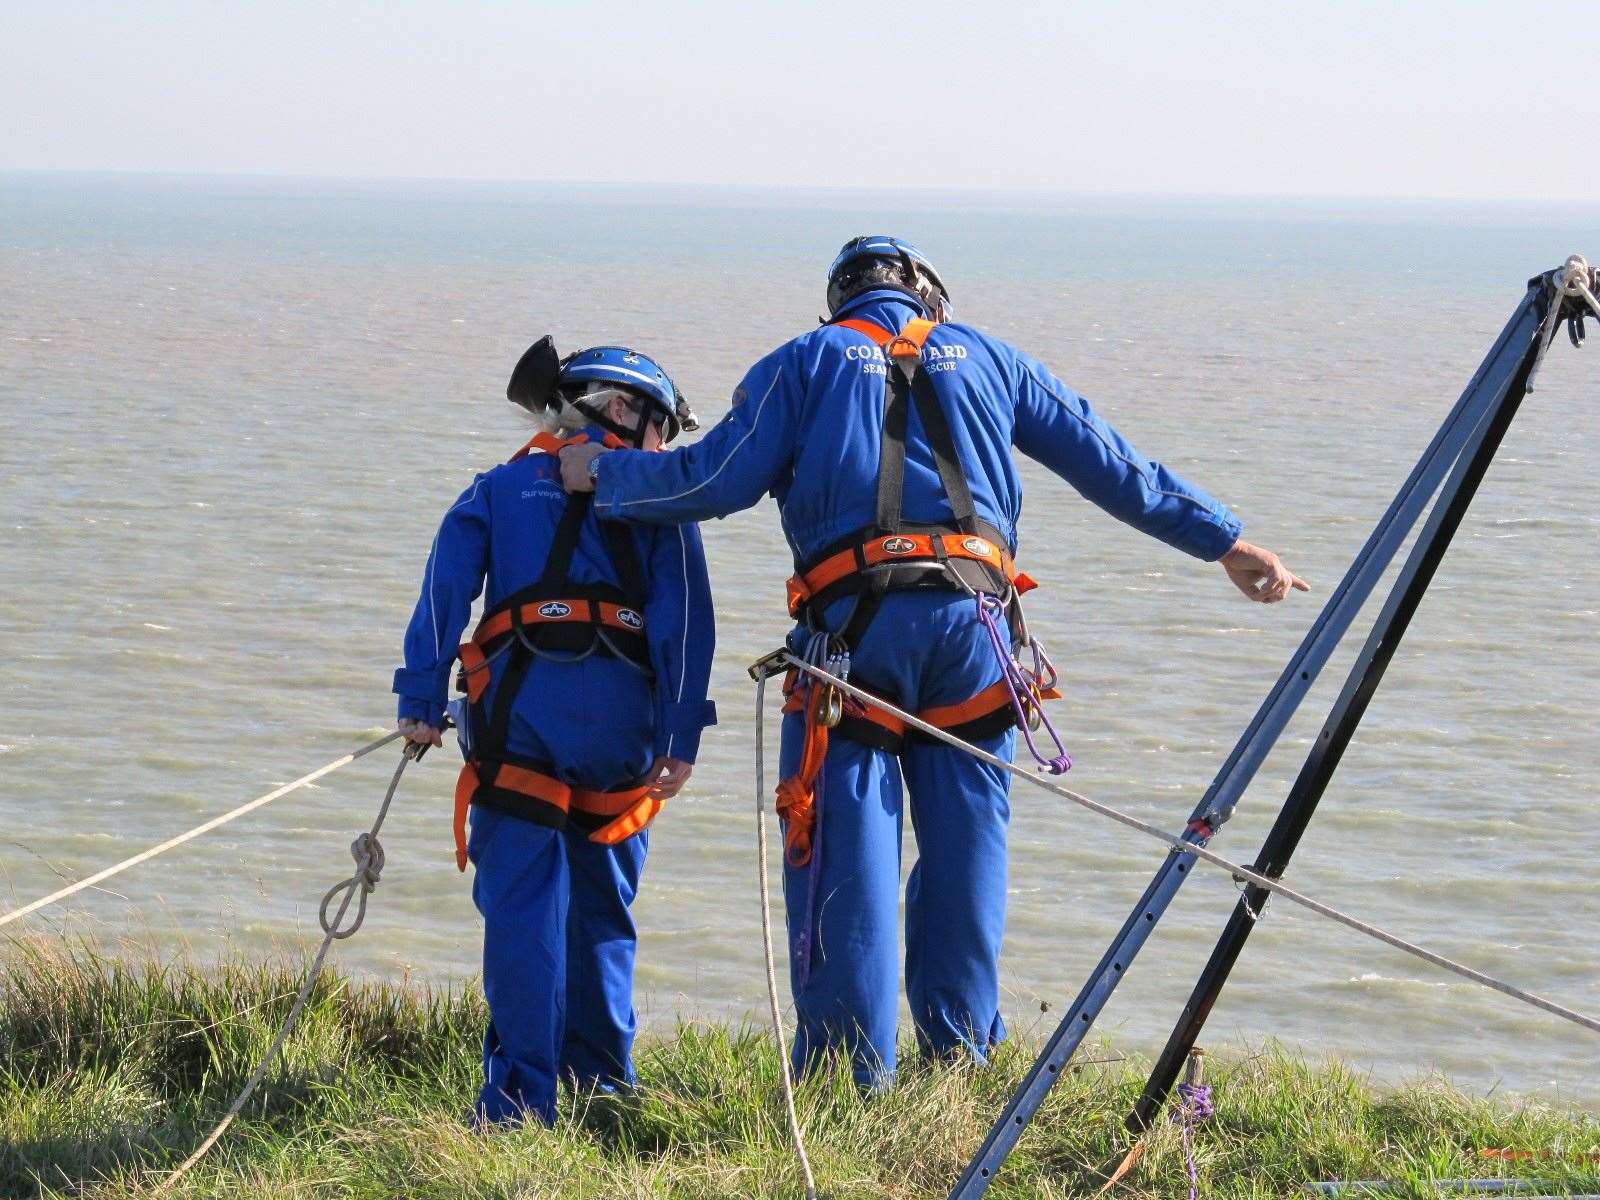 The Coastguard and fire service worked together to rescue two climbers stuck on a cliff edge in Dover. Library picture